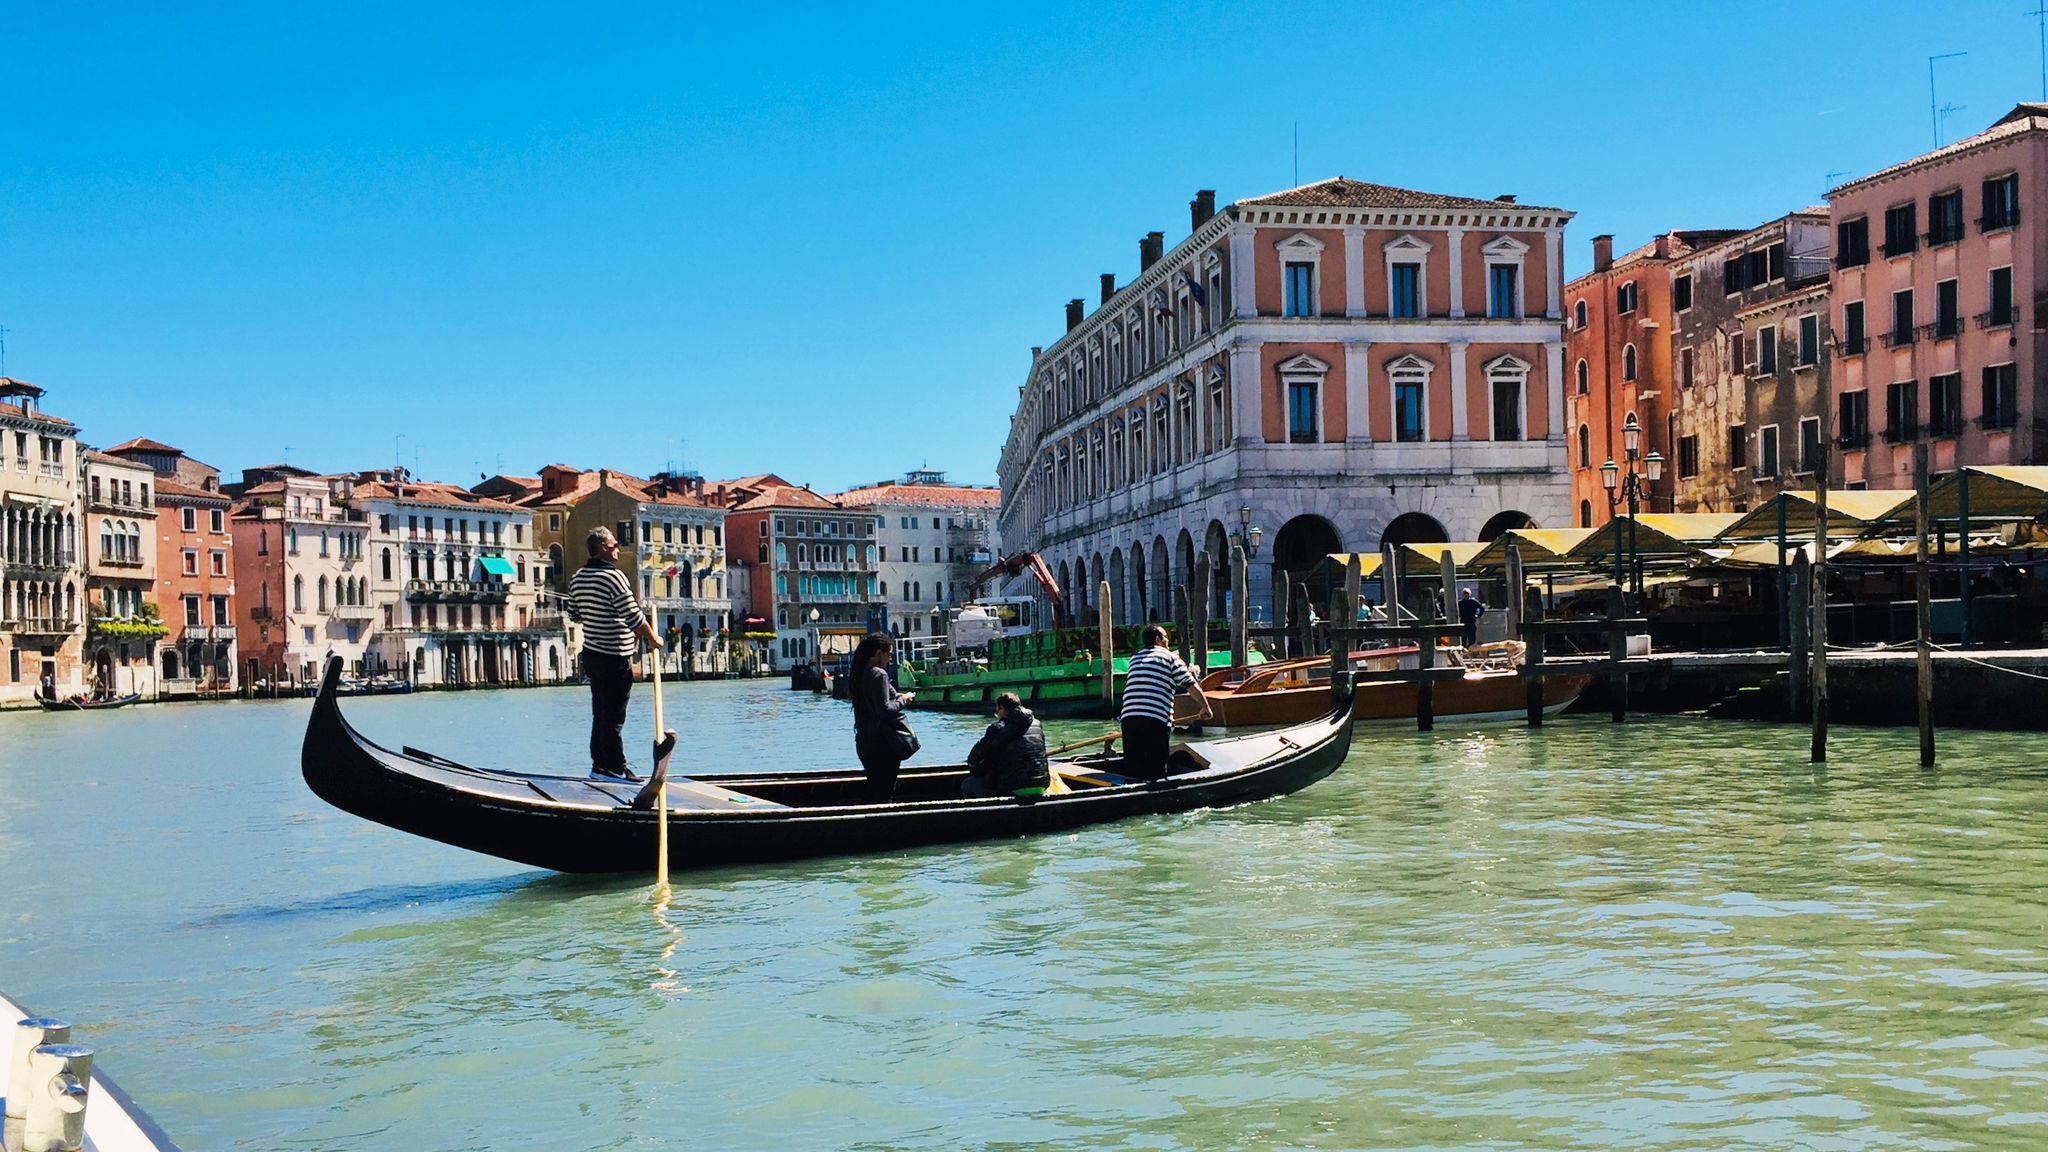 Image shows a Gondola crossing the water on a sunny day in Venice.